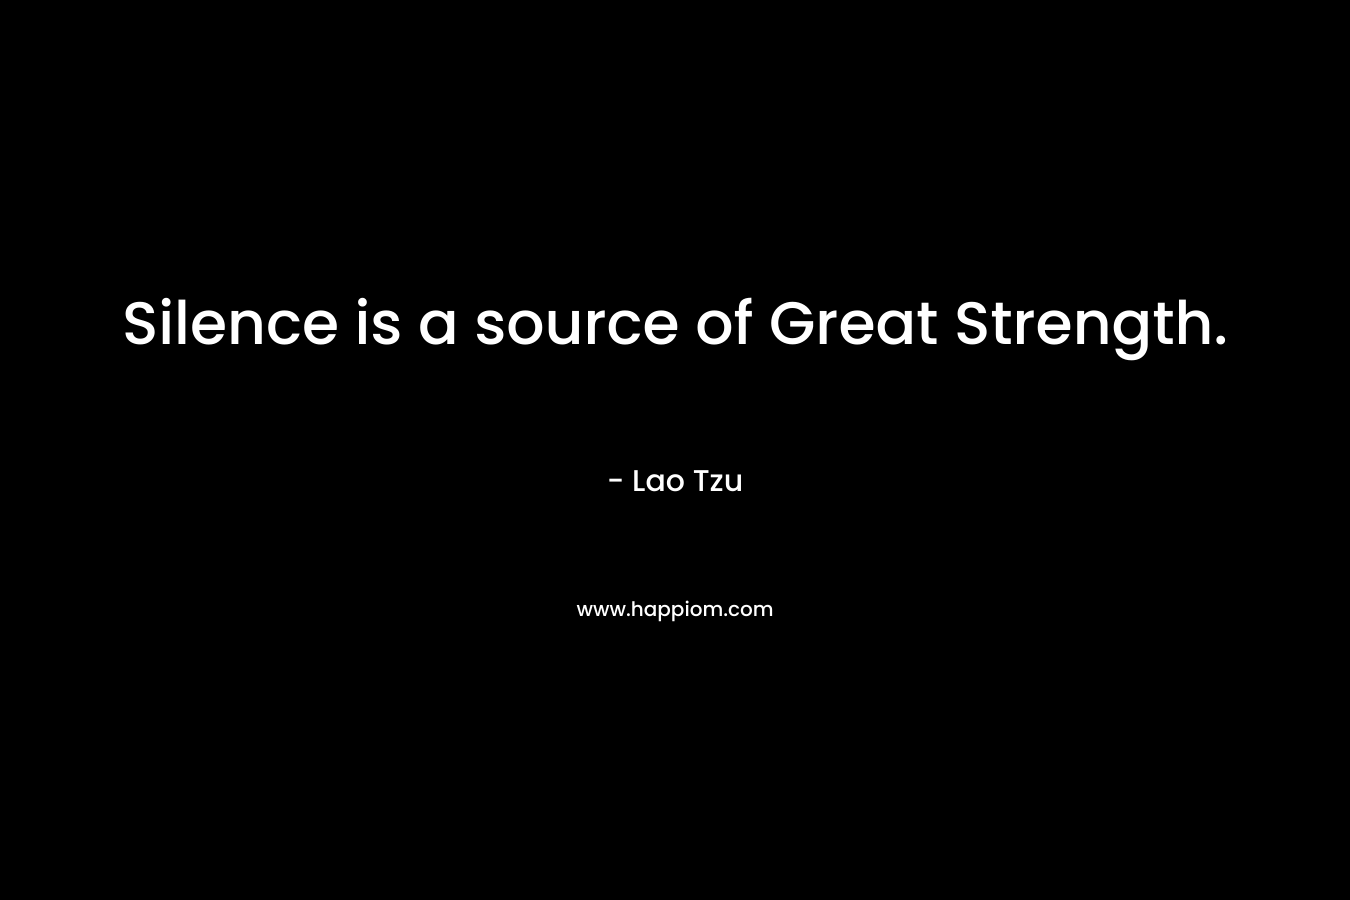 Silence is a source of Great Strength. – Lao Tzu